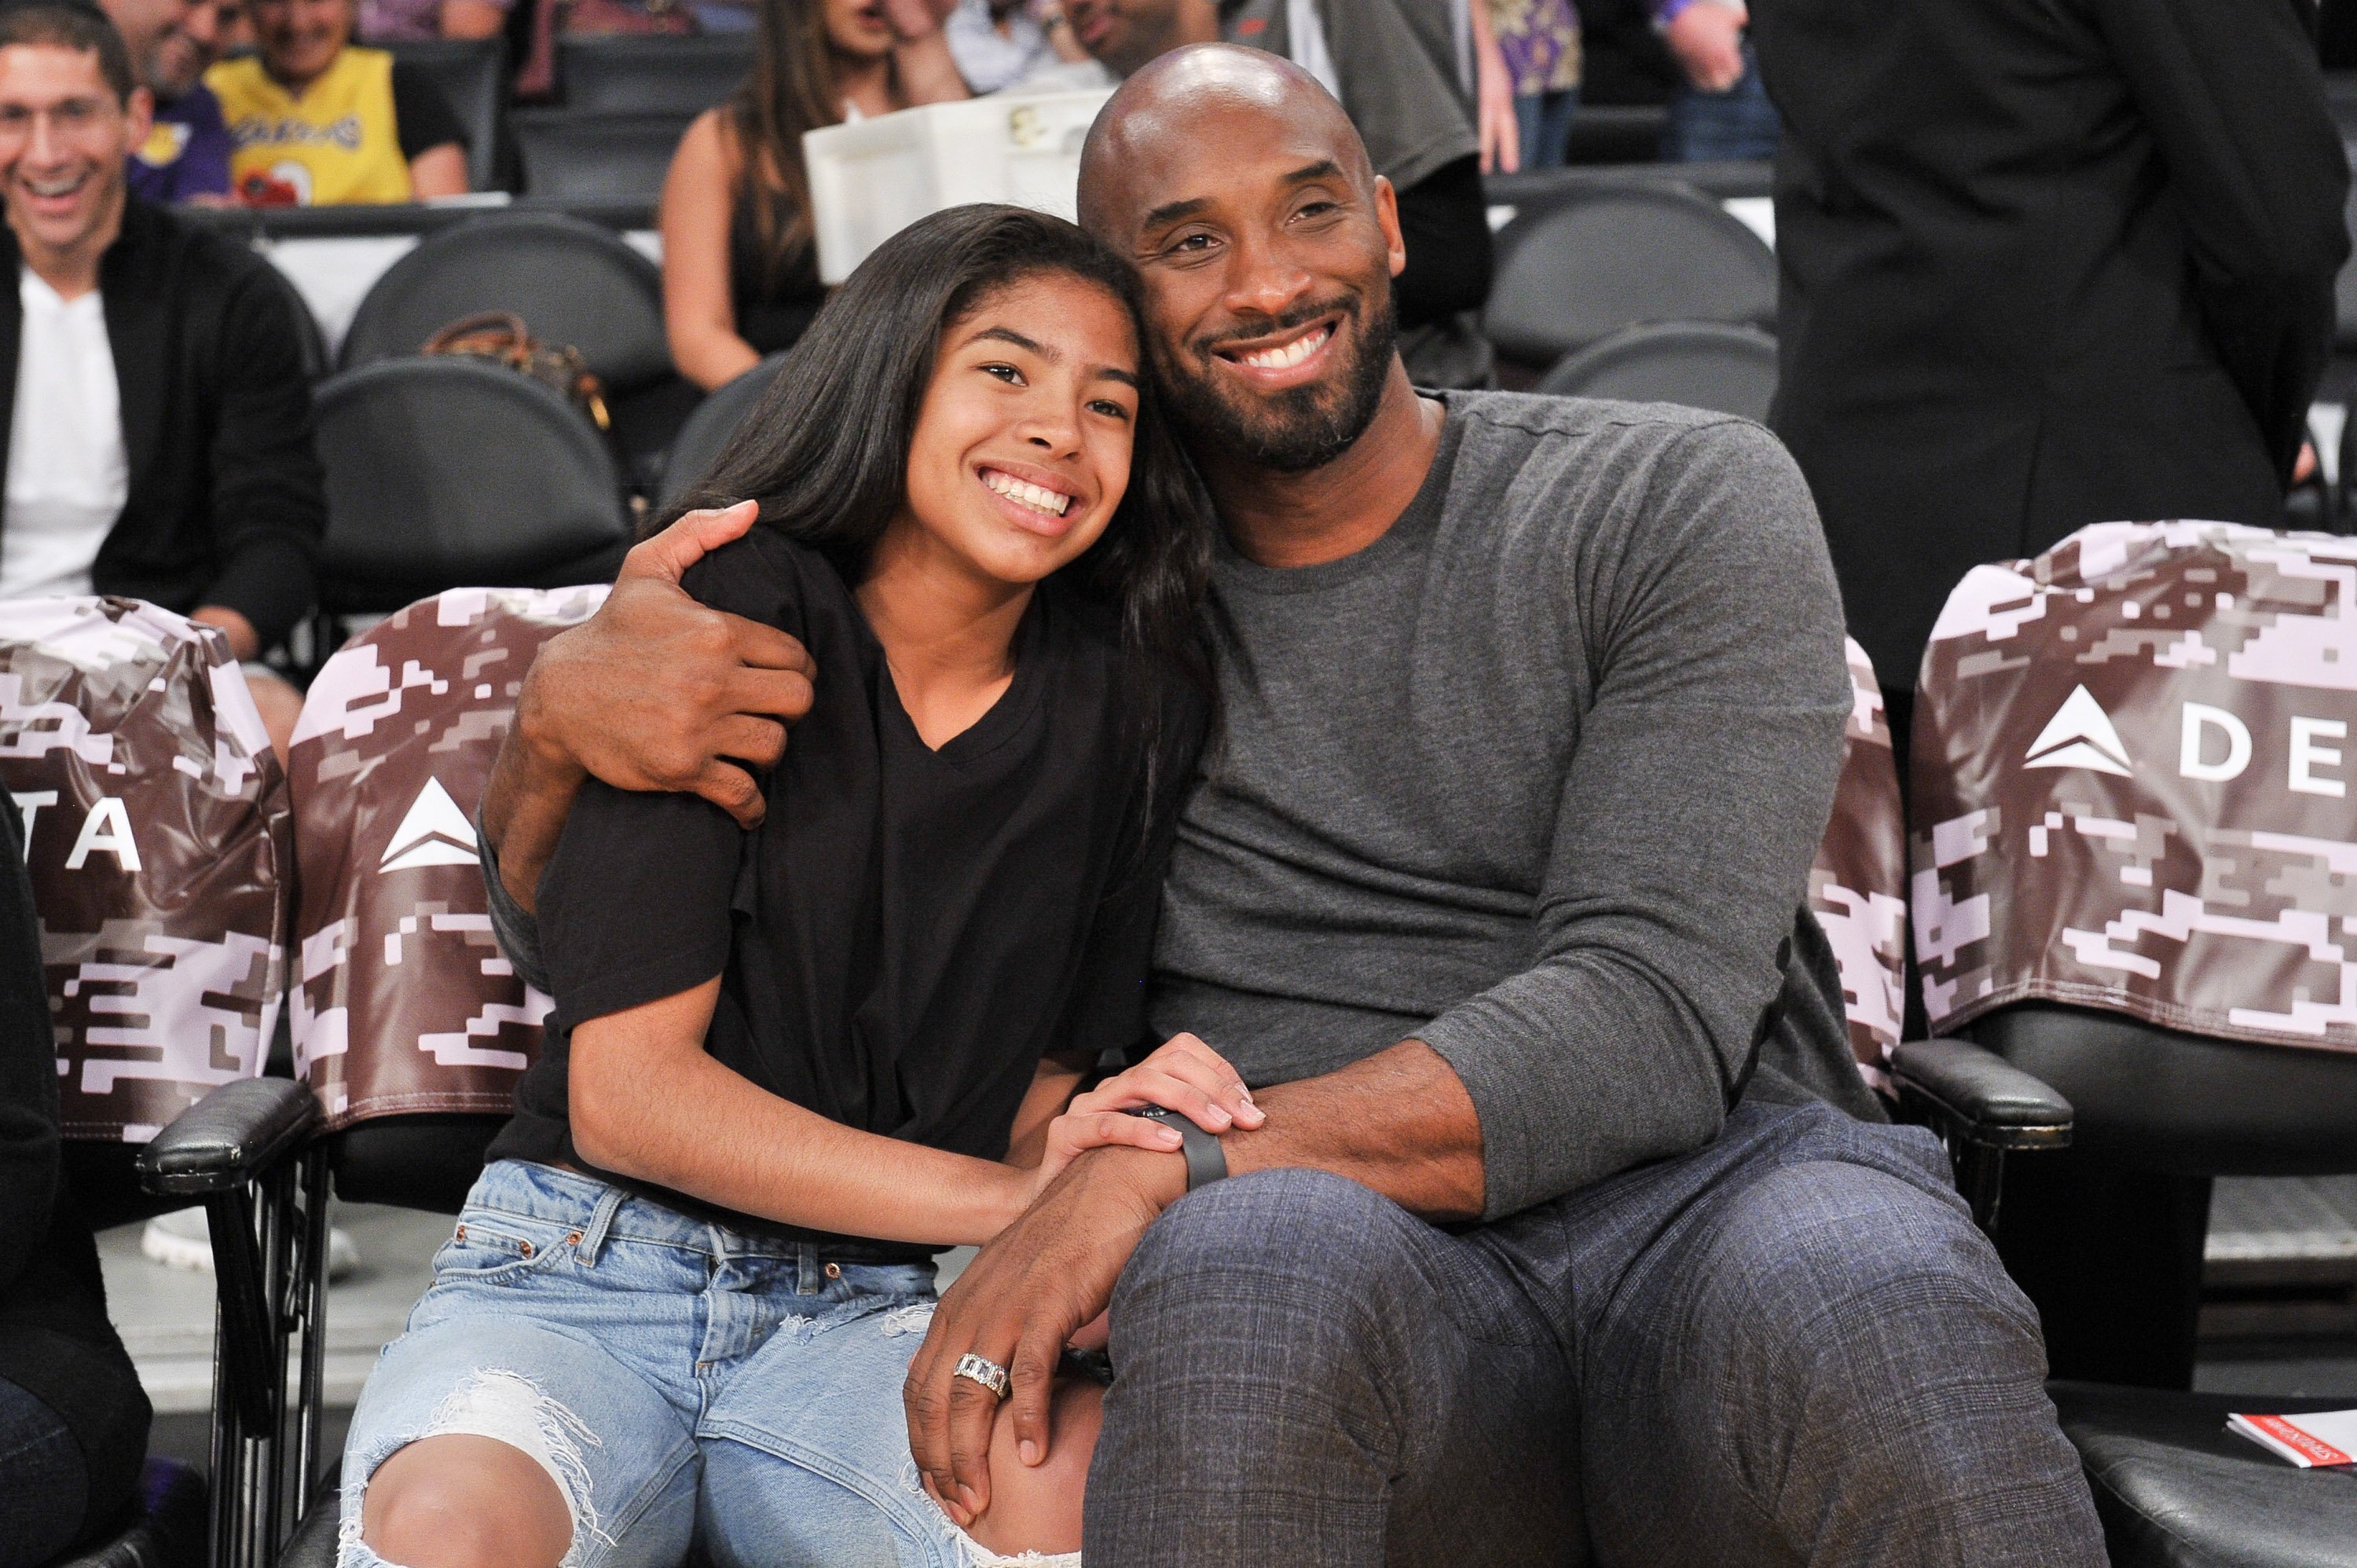 Kobe Bryant and his daughter Gianna Bryant attend a basketball game at  the Staples Center on November 17, 2019, in Los Angeles, California. | Source: Getty Images.